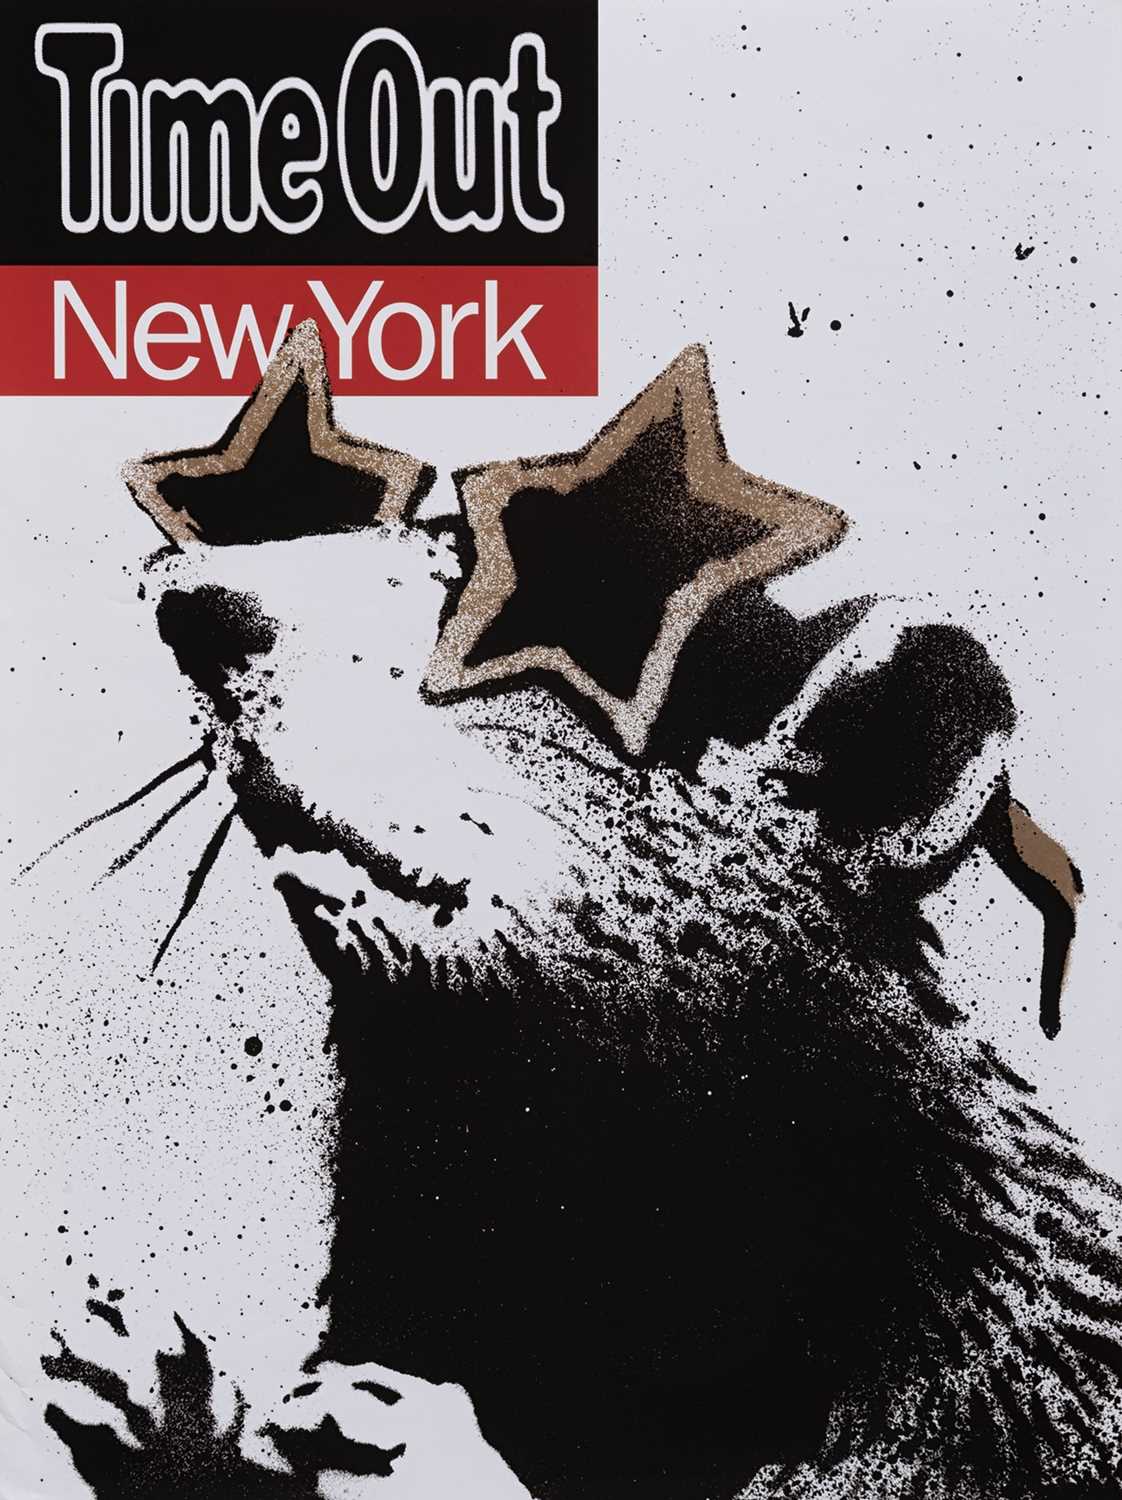 Lot 75 - Banksy (British 1974-), 'Time Out New York', 2010